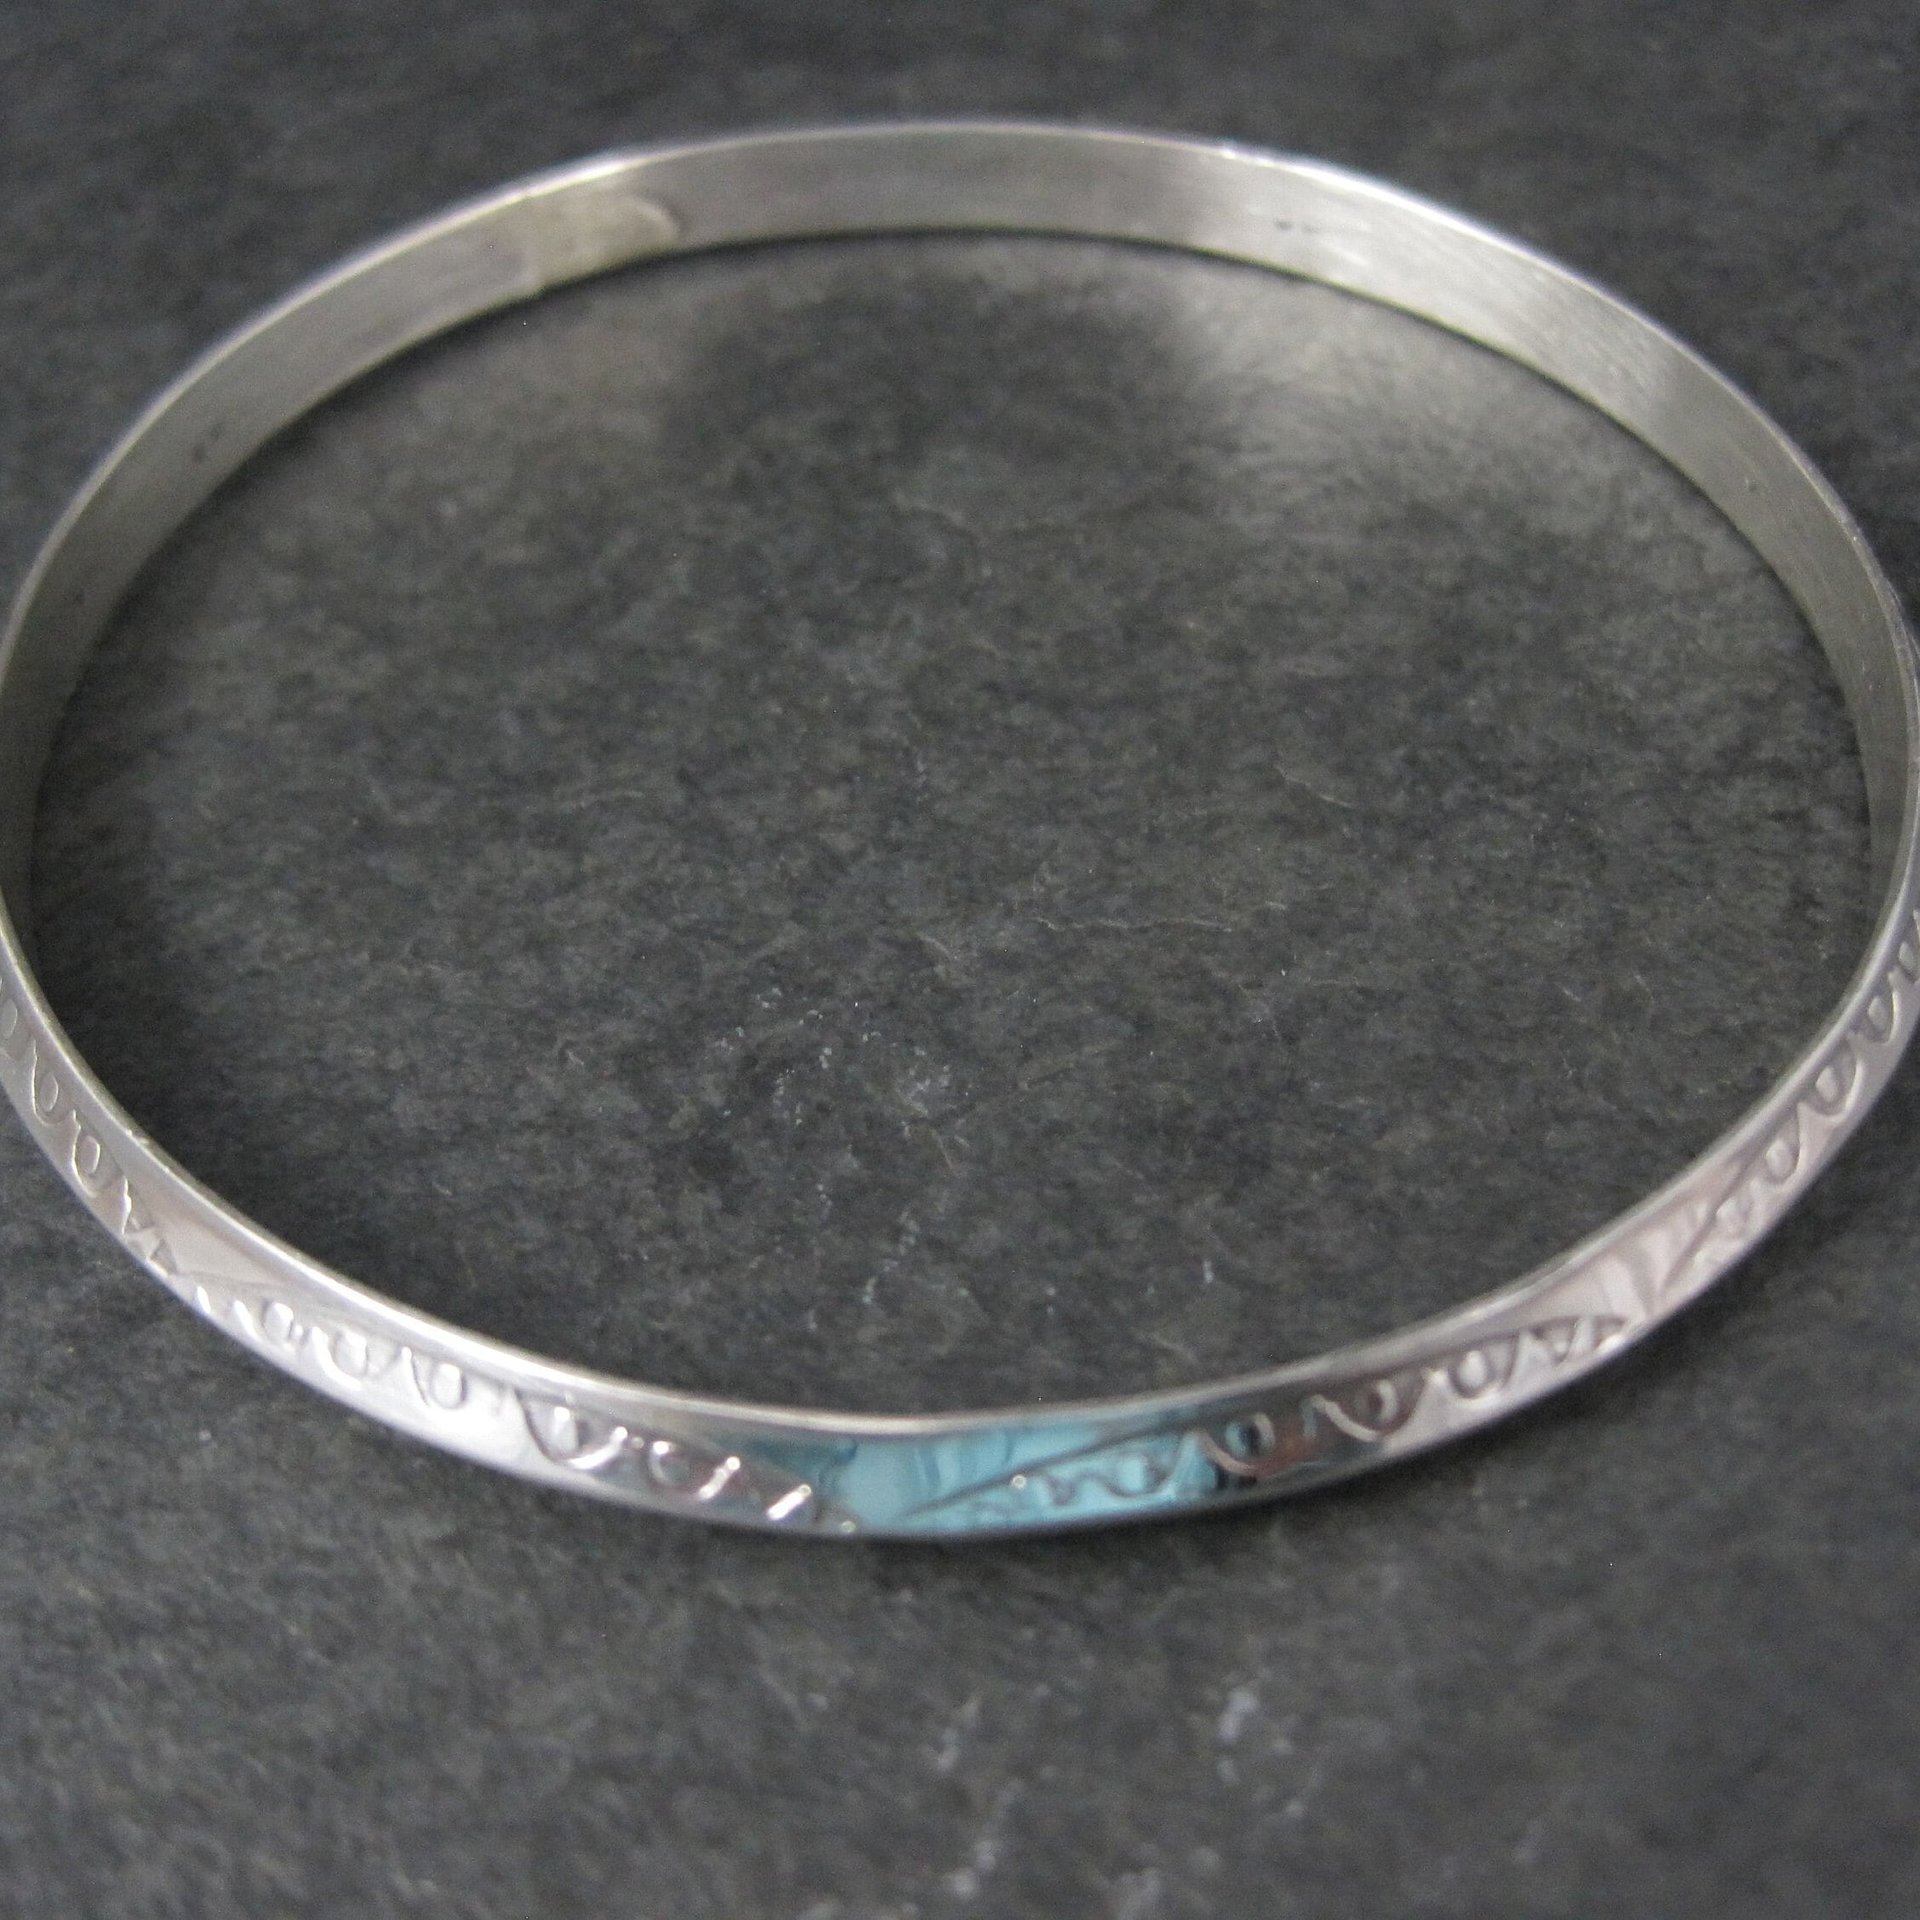 Navajo Carinated 5mm Sterling Bangle Bracelet 8 Inches Tahe 1A